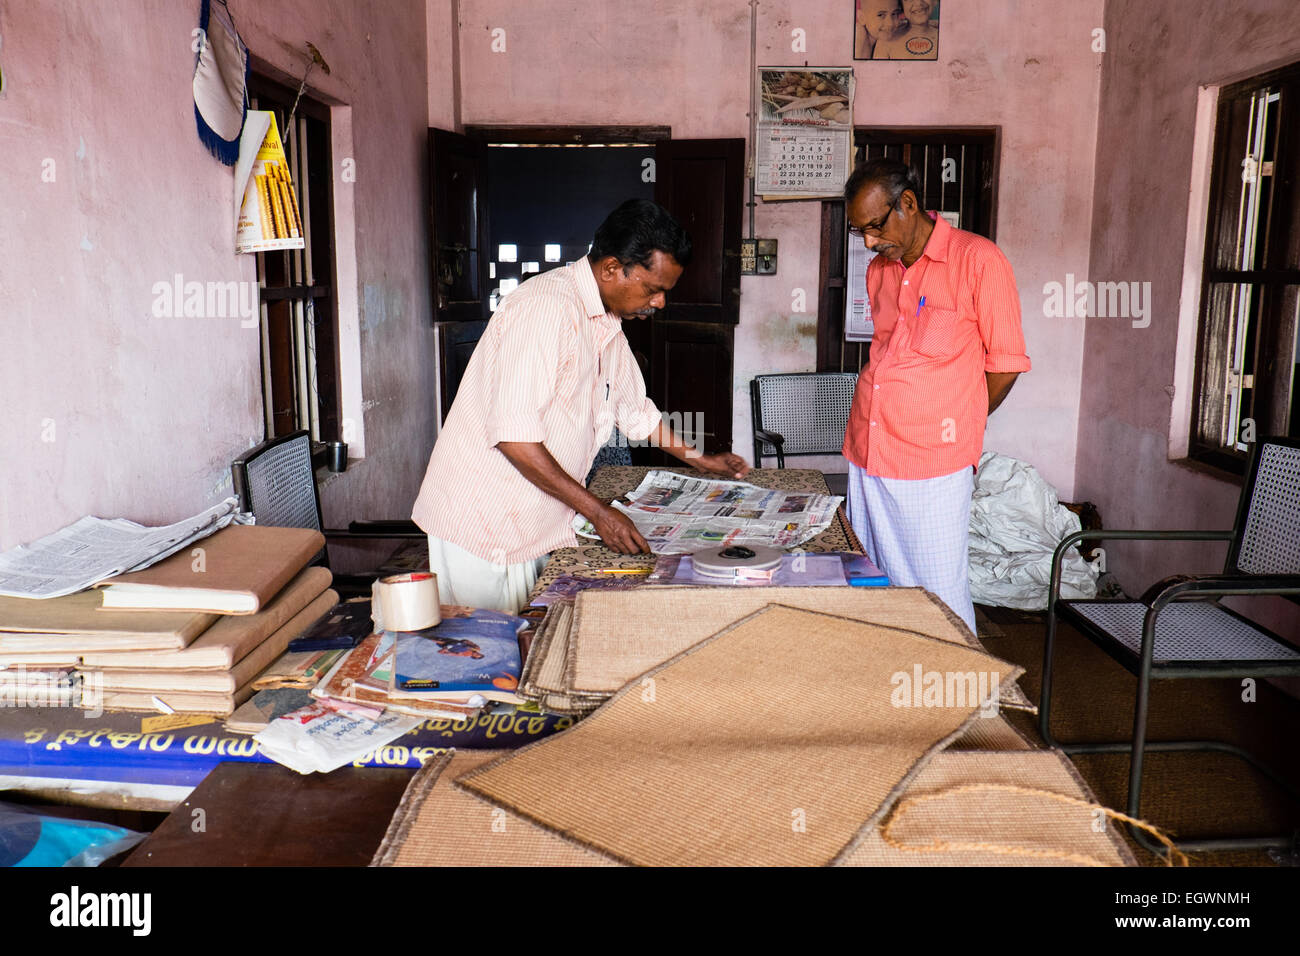 Inside a coir factory near Alleppey, Kerala, Southern India - handmade rugs, mats and matting is made in a dying industry Stock Photo